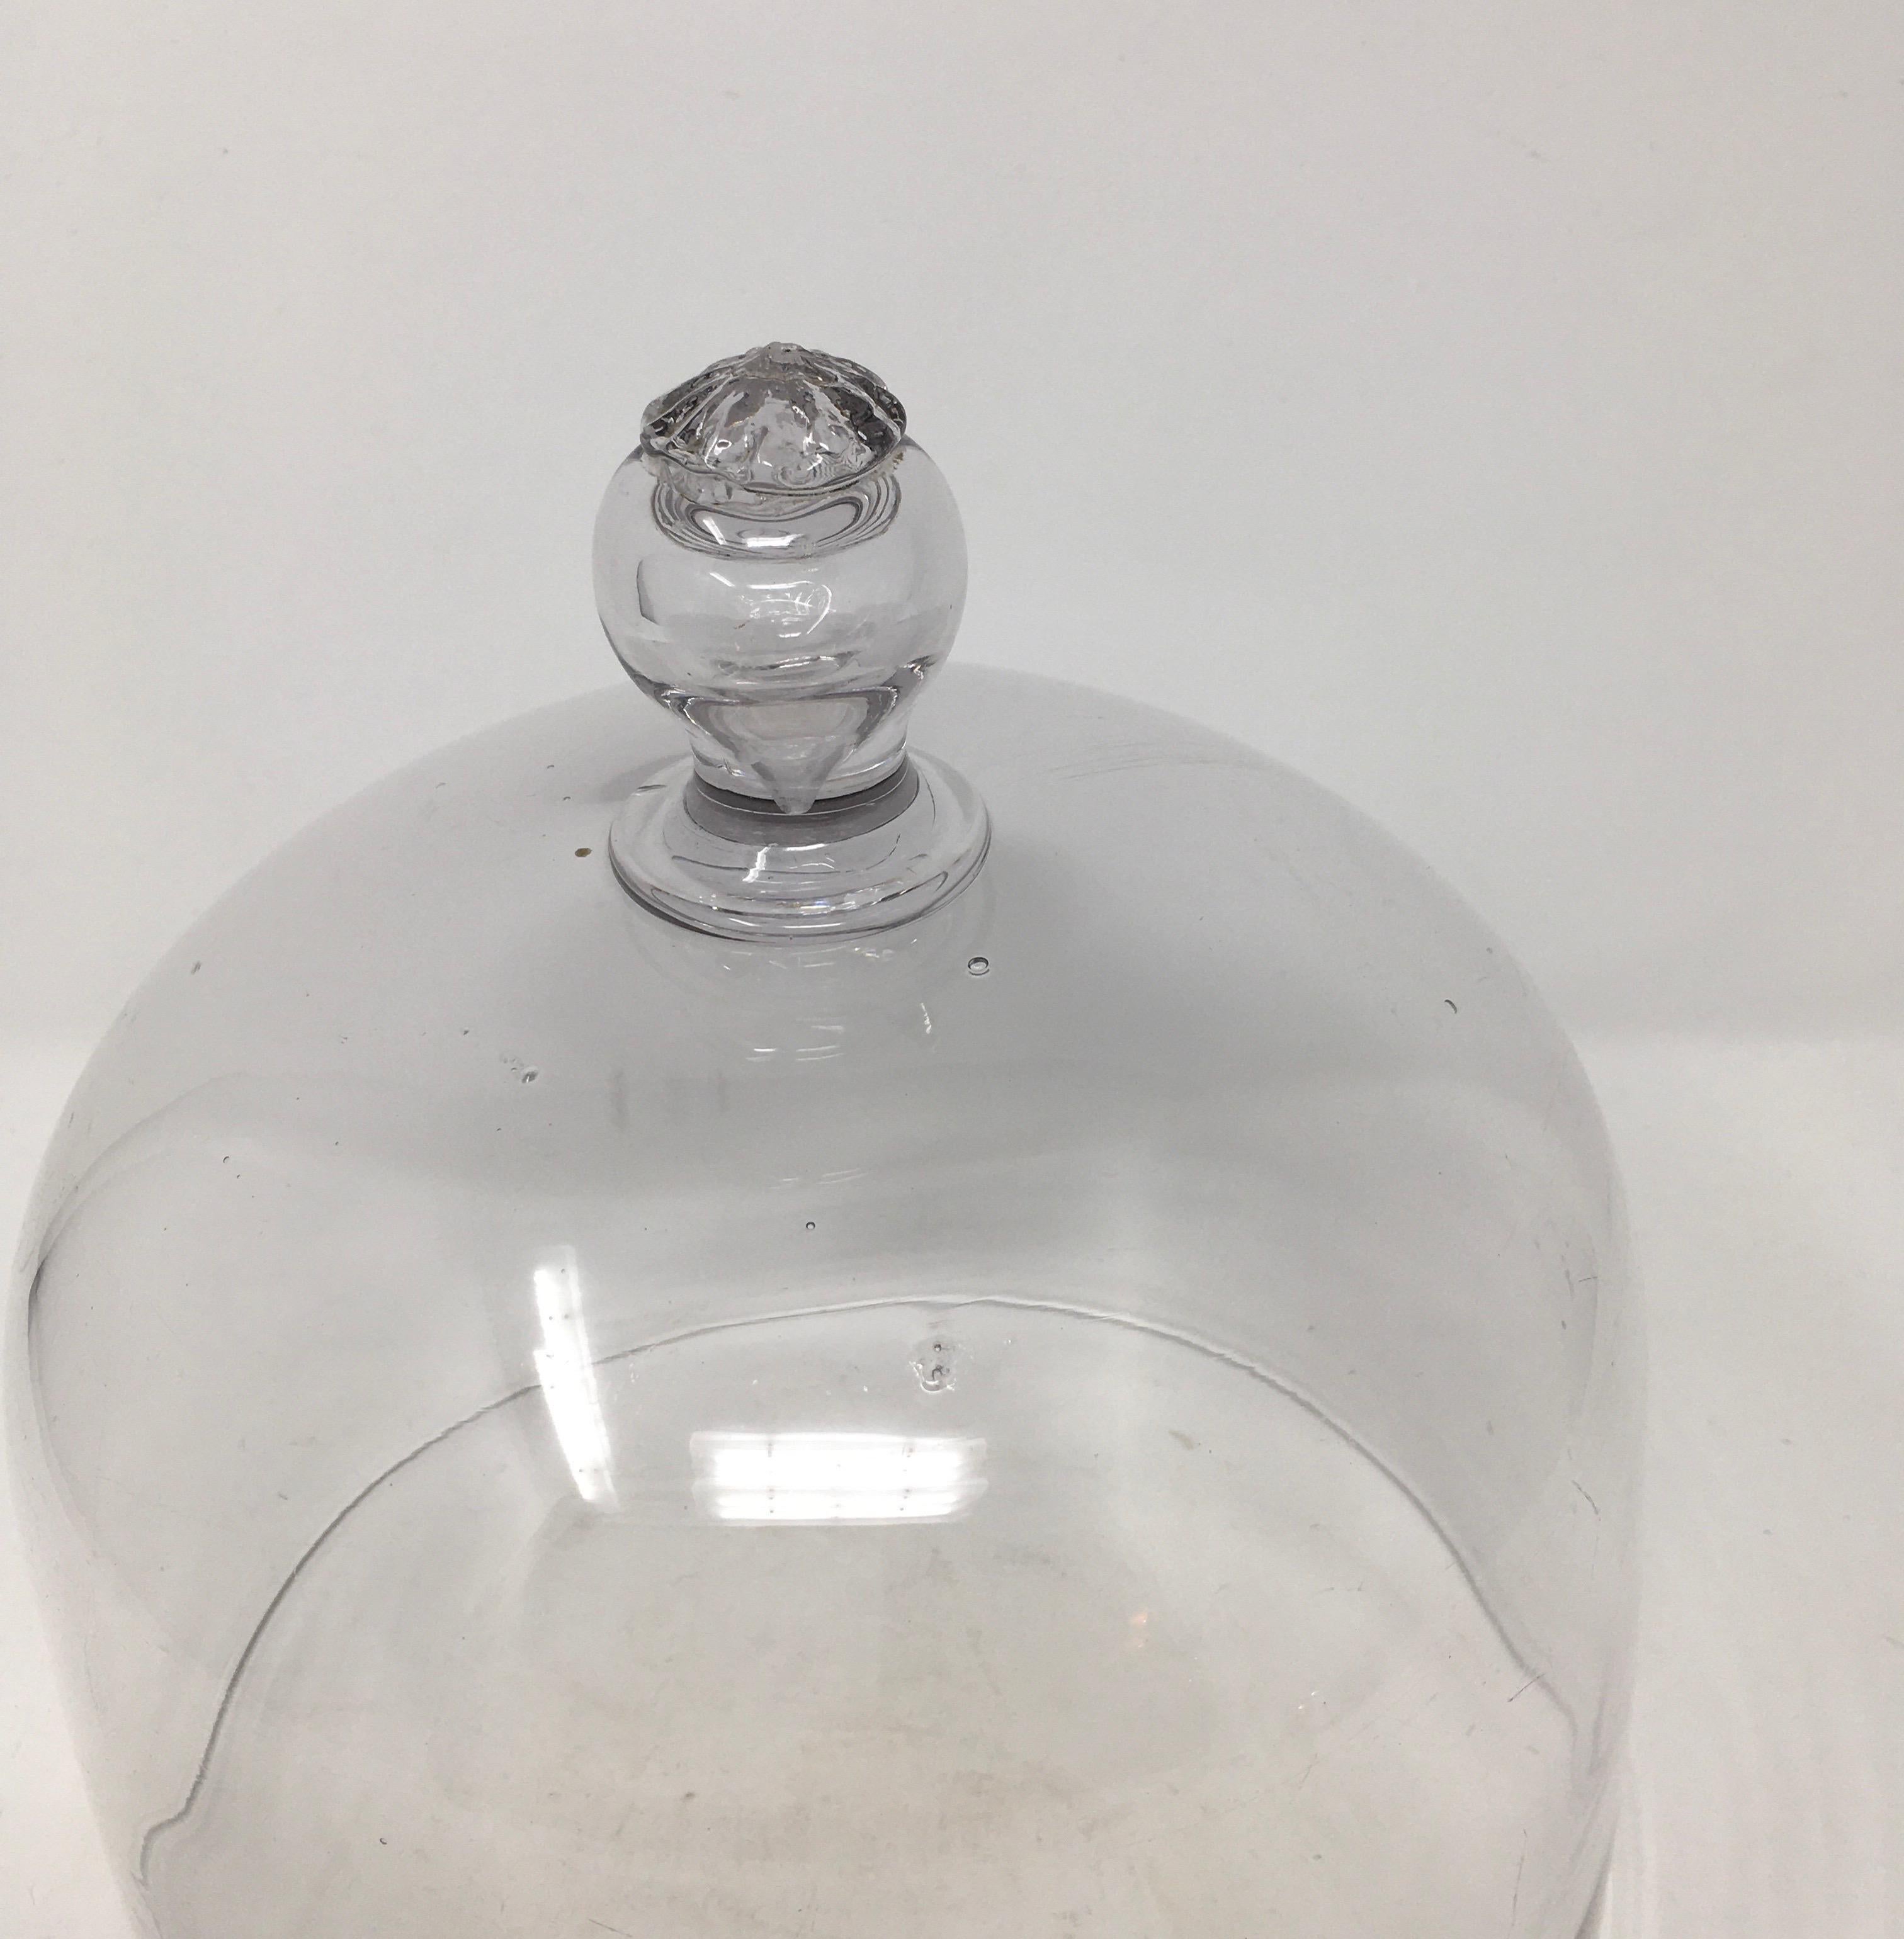 French antique Patisserie glass dome cloche with a solid cut glass knob handle. Smooth and polished glass, these were used in French Patisseries to cover and display pastries.